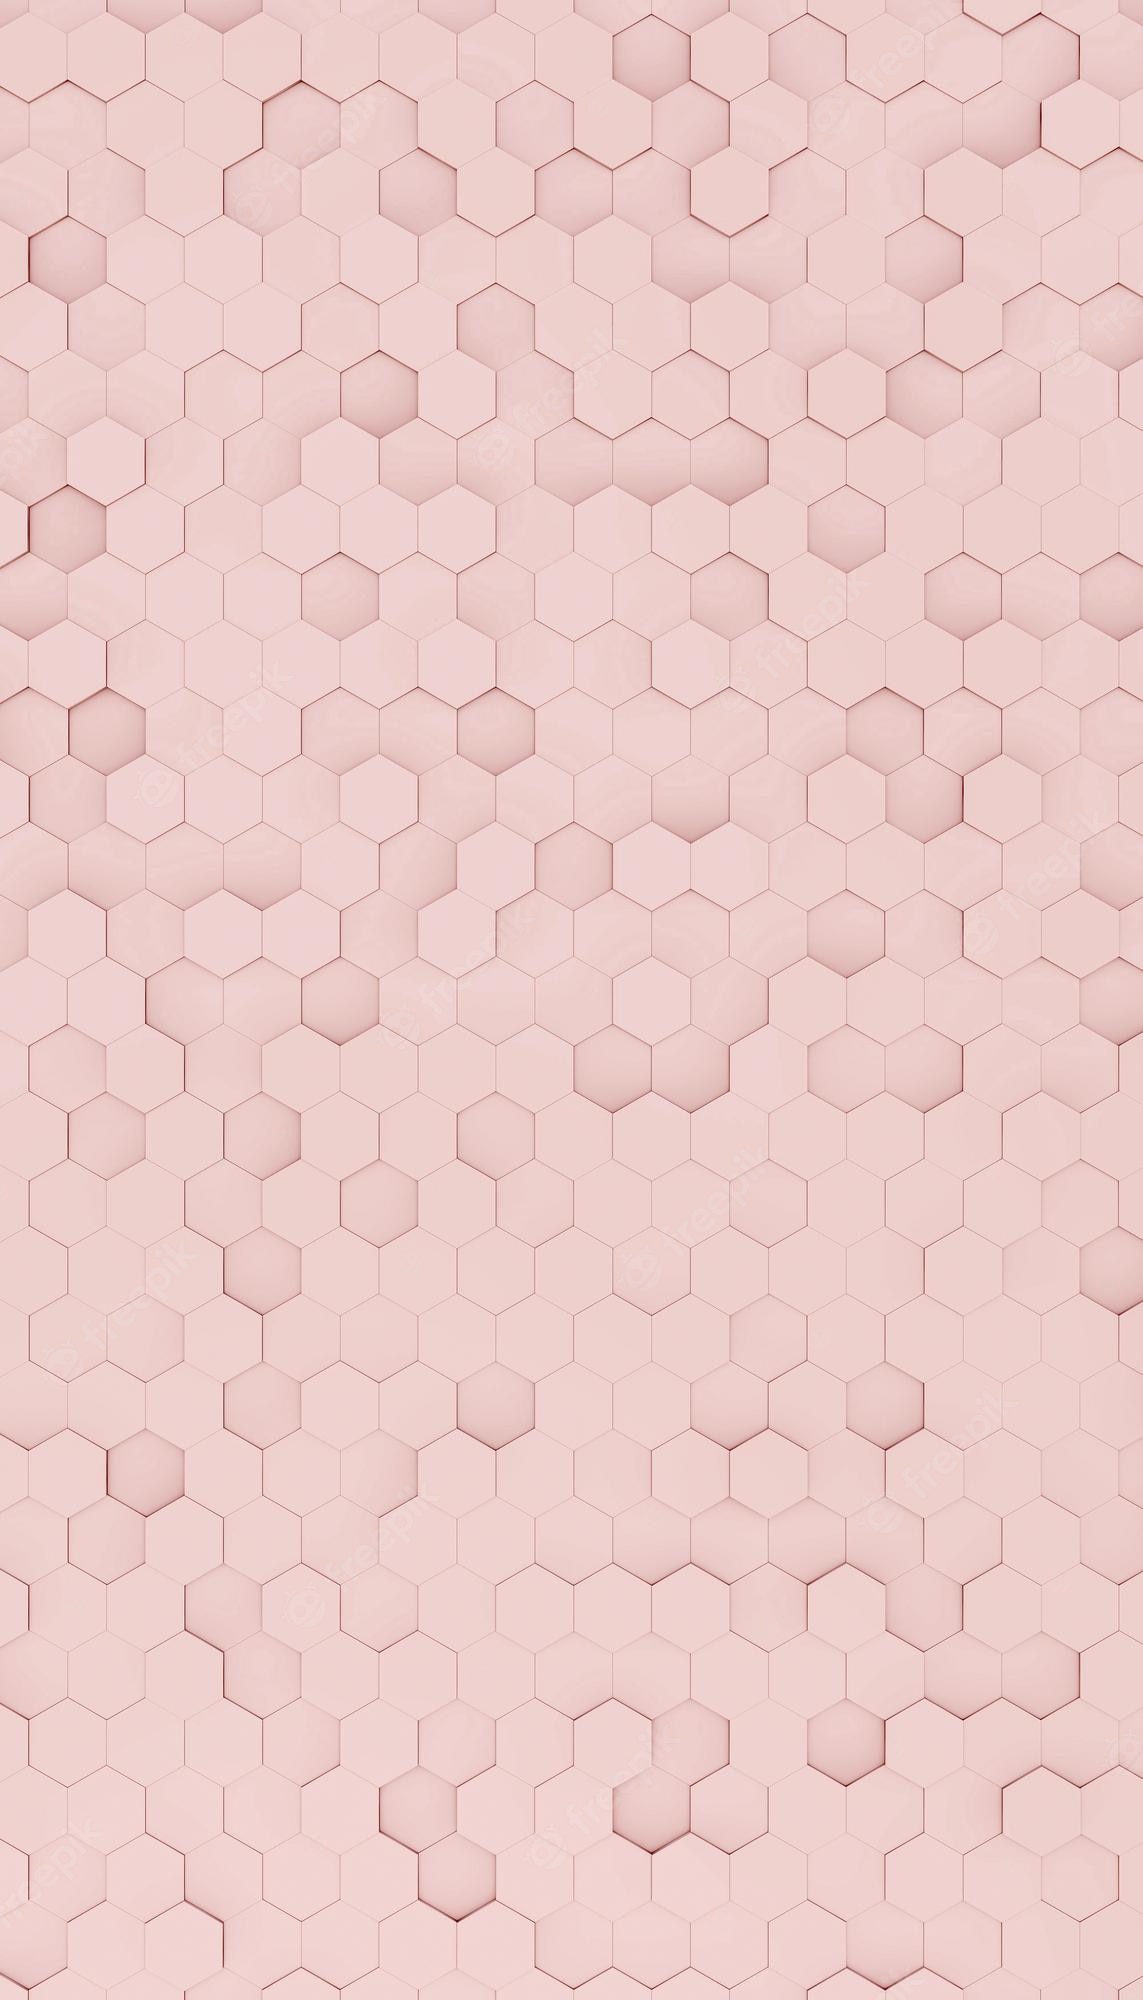 Premium Photo. Abstract hexagonal pink background for display of makeup products 3D rendering